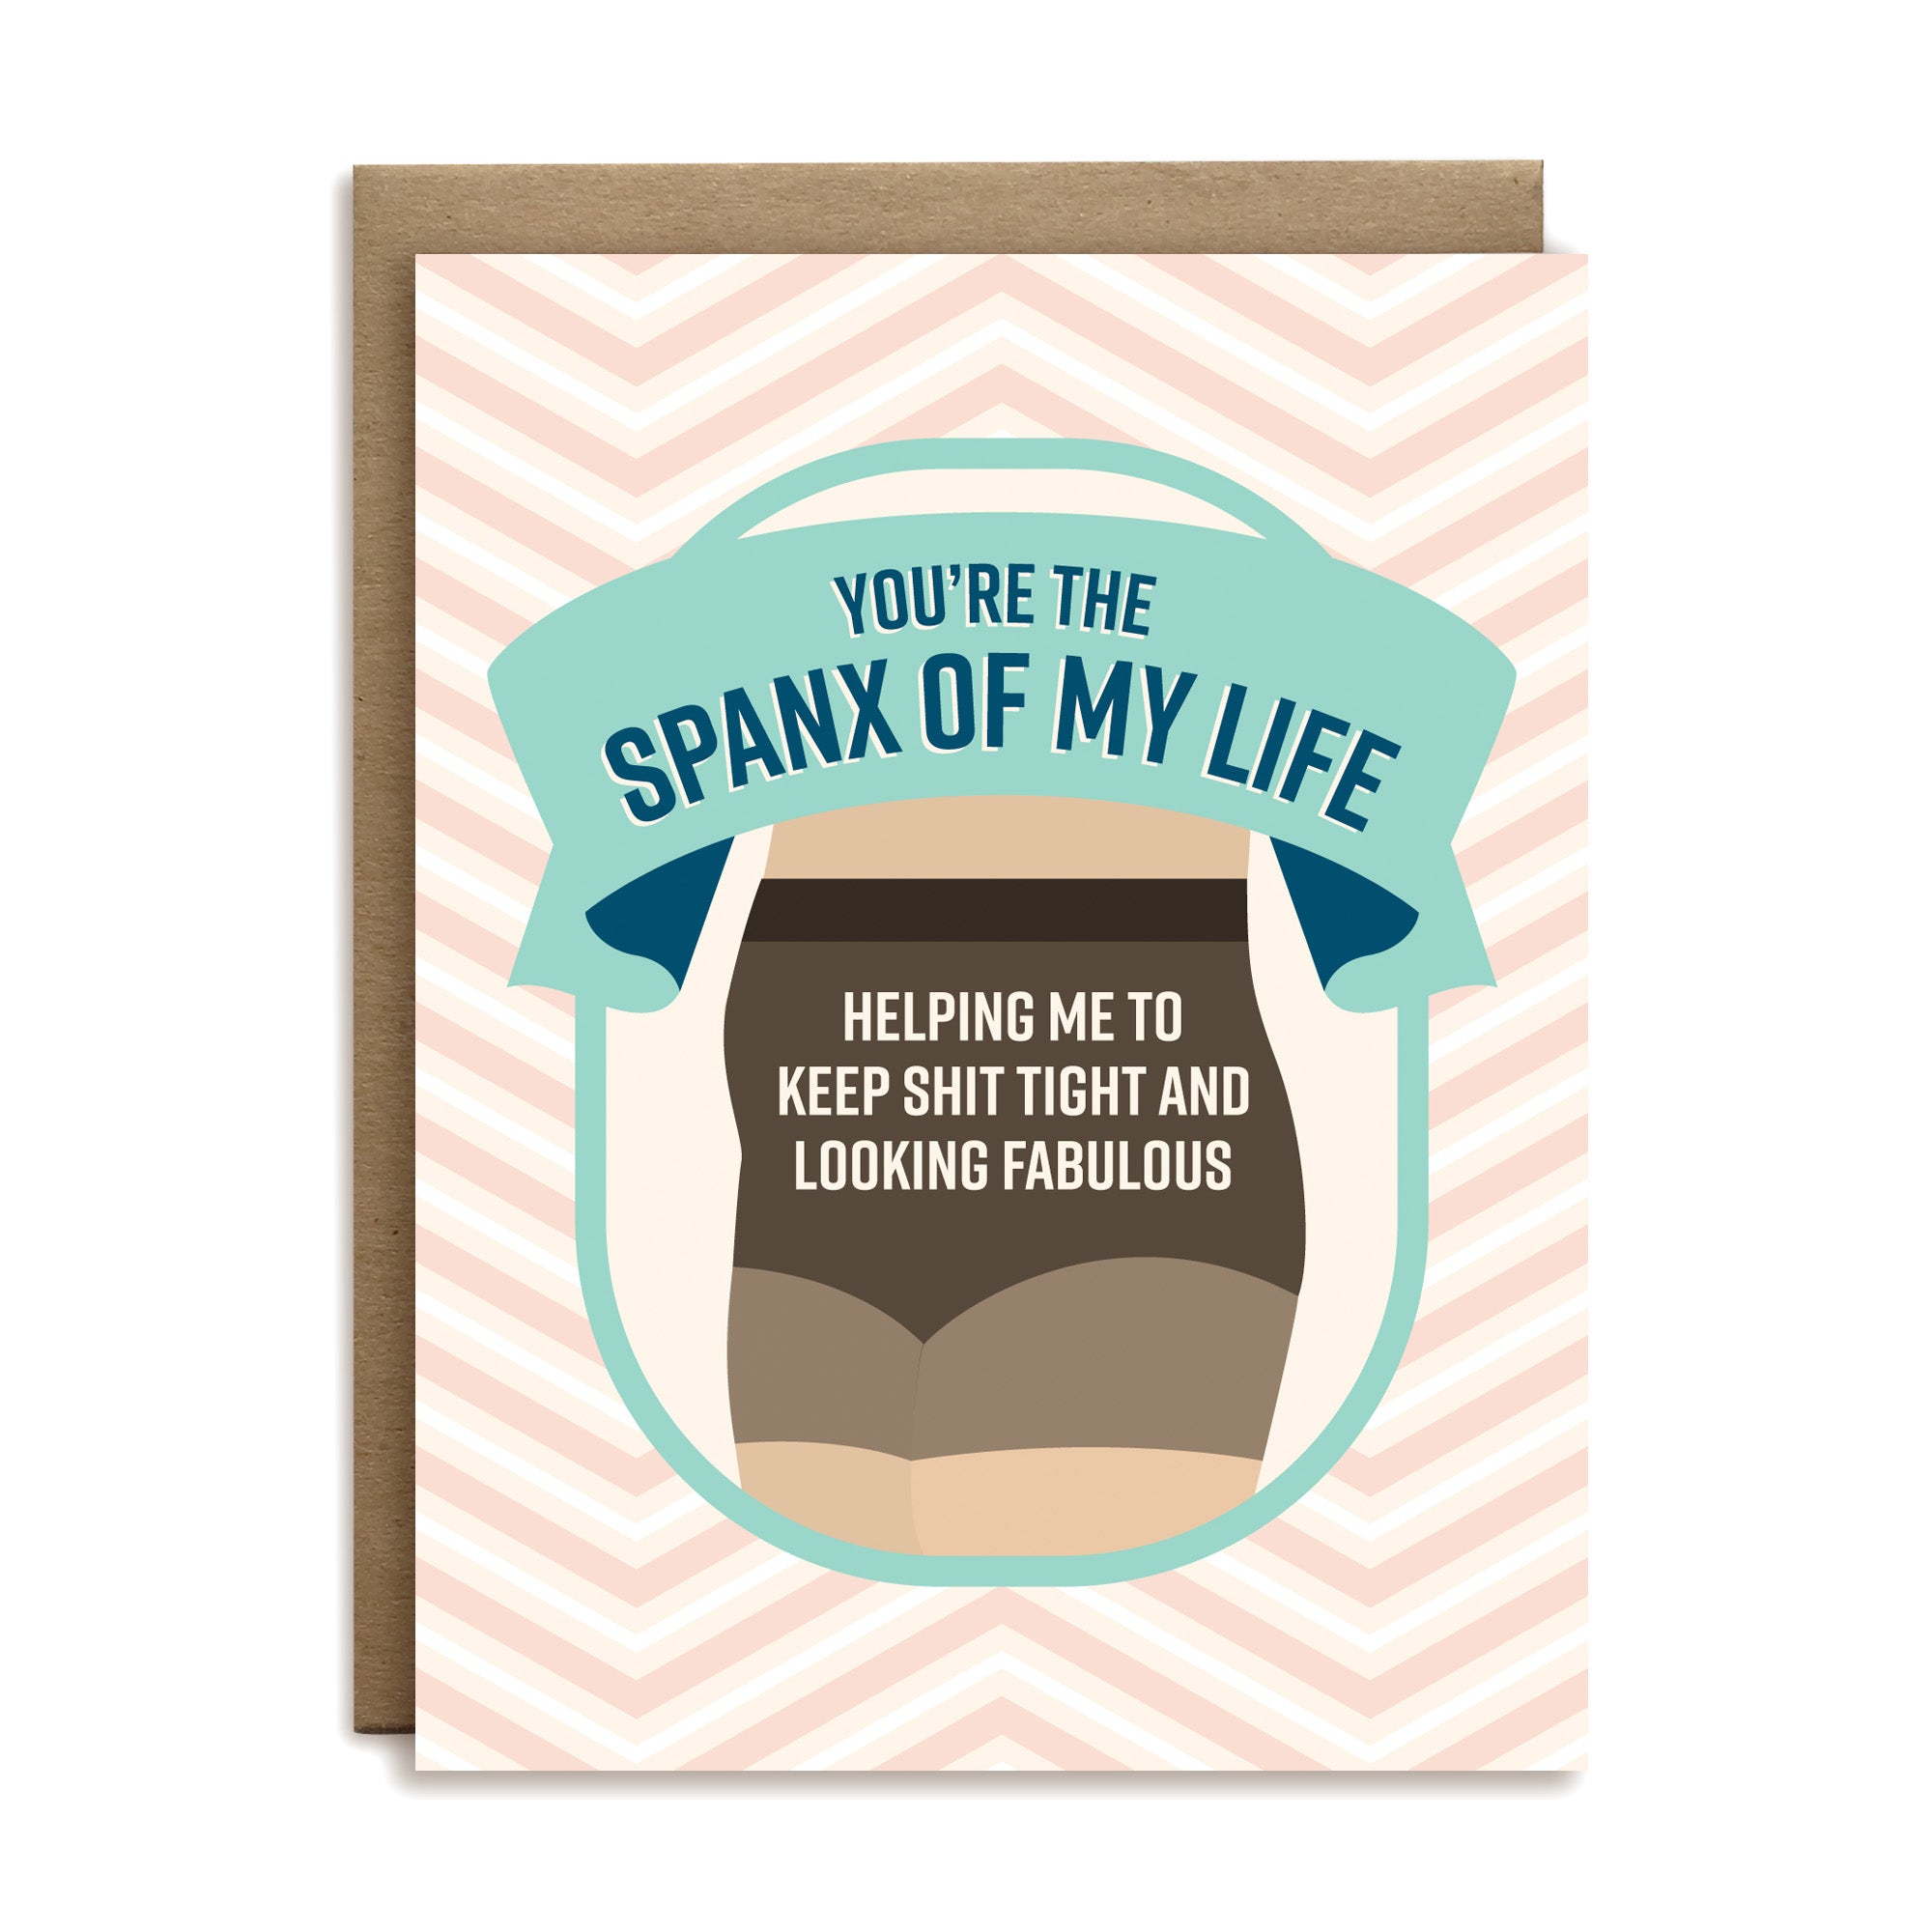 Spanx of my life friendship greeting card by I'll Know It When I